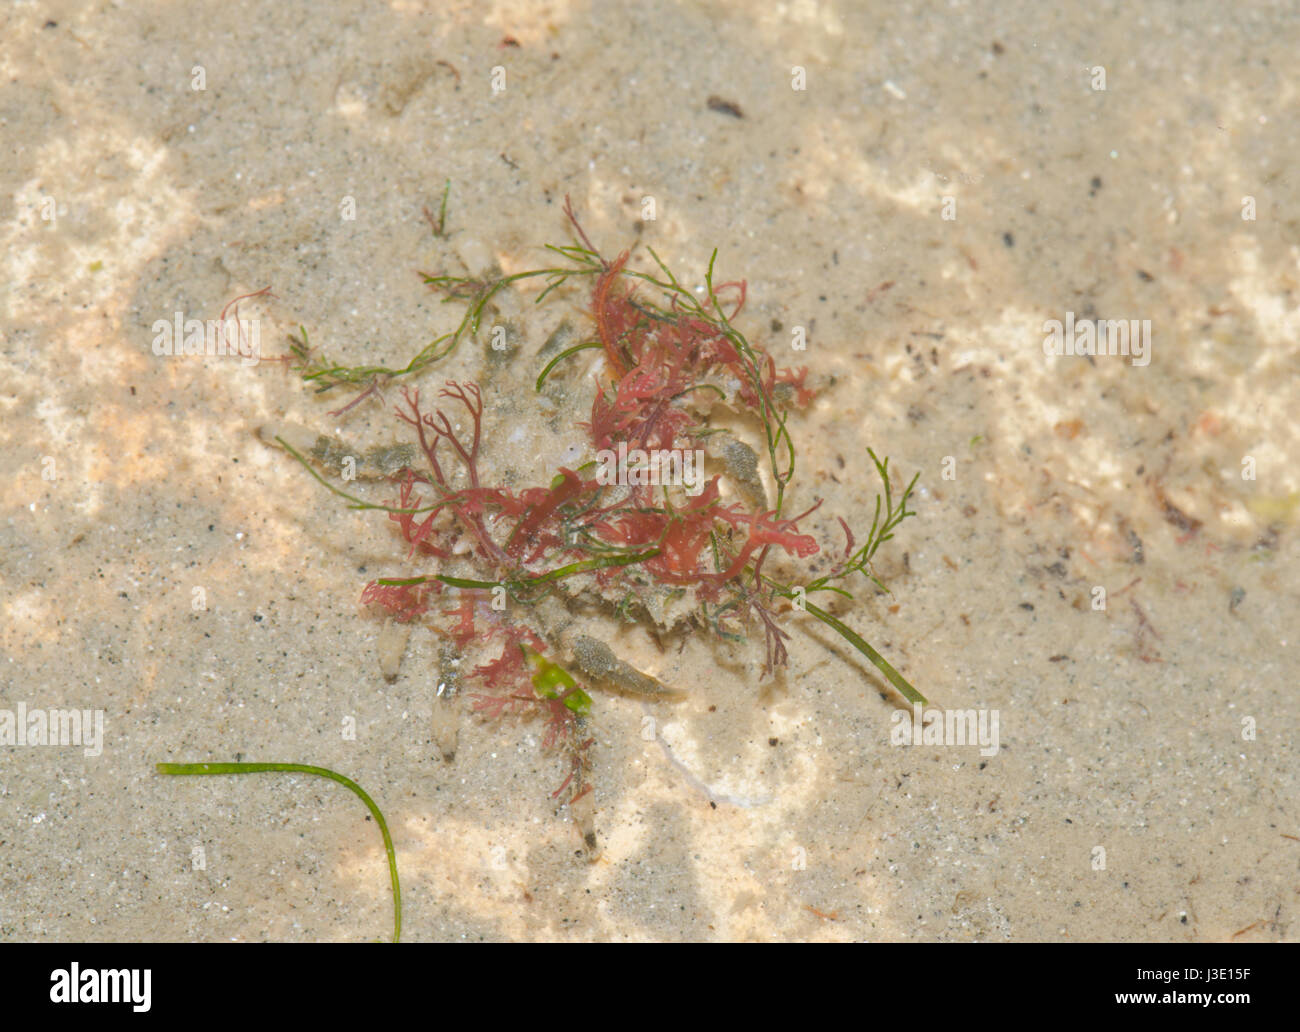 Camouflaged Spider Crab decorated with algae 1 of 2 Stock Photo